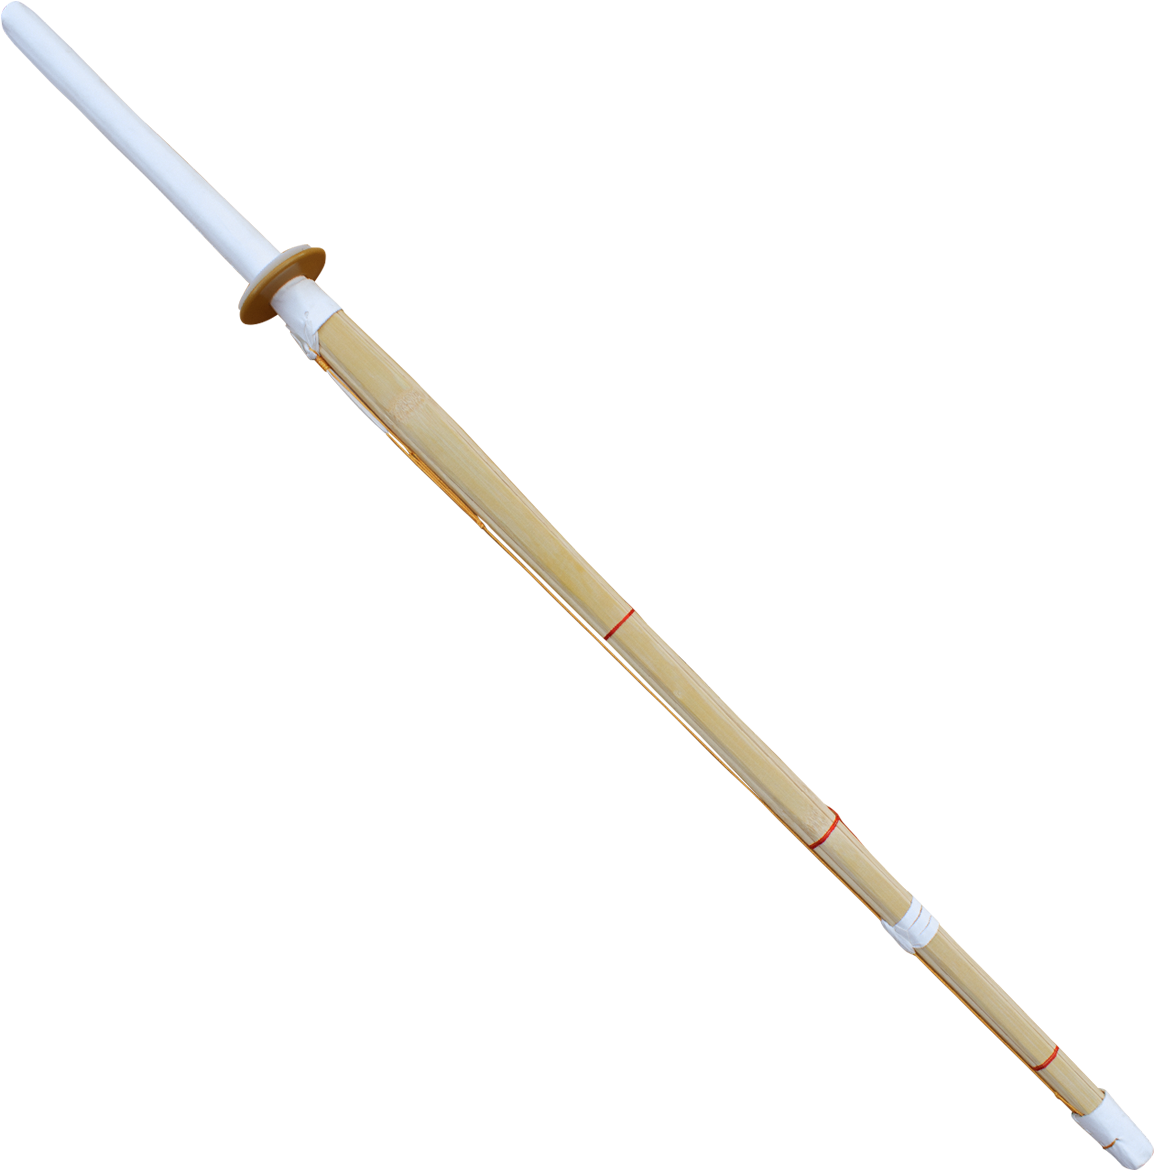 A White And Brown Sword